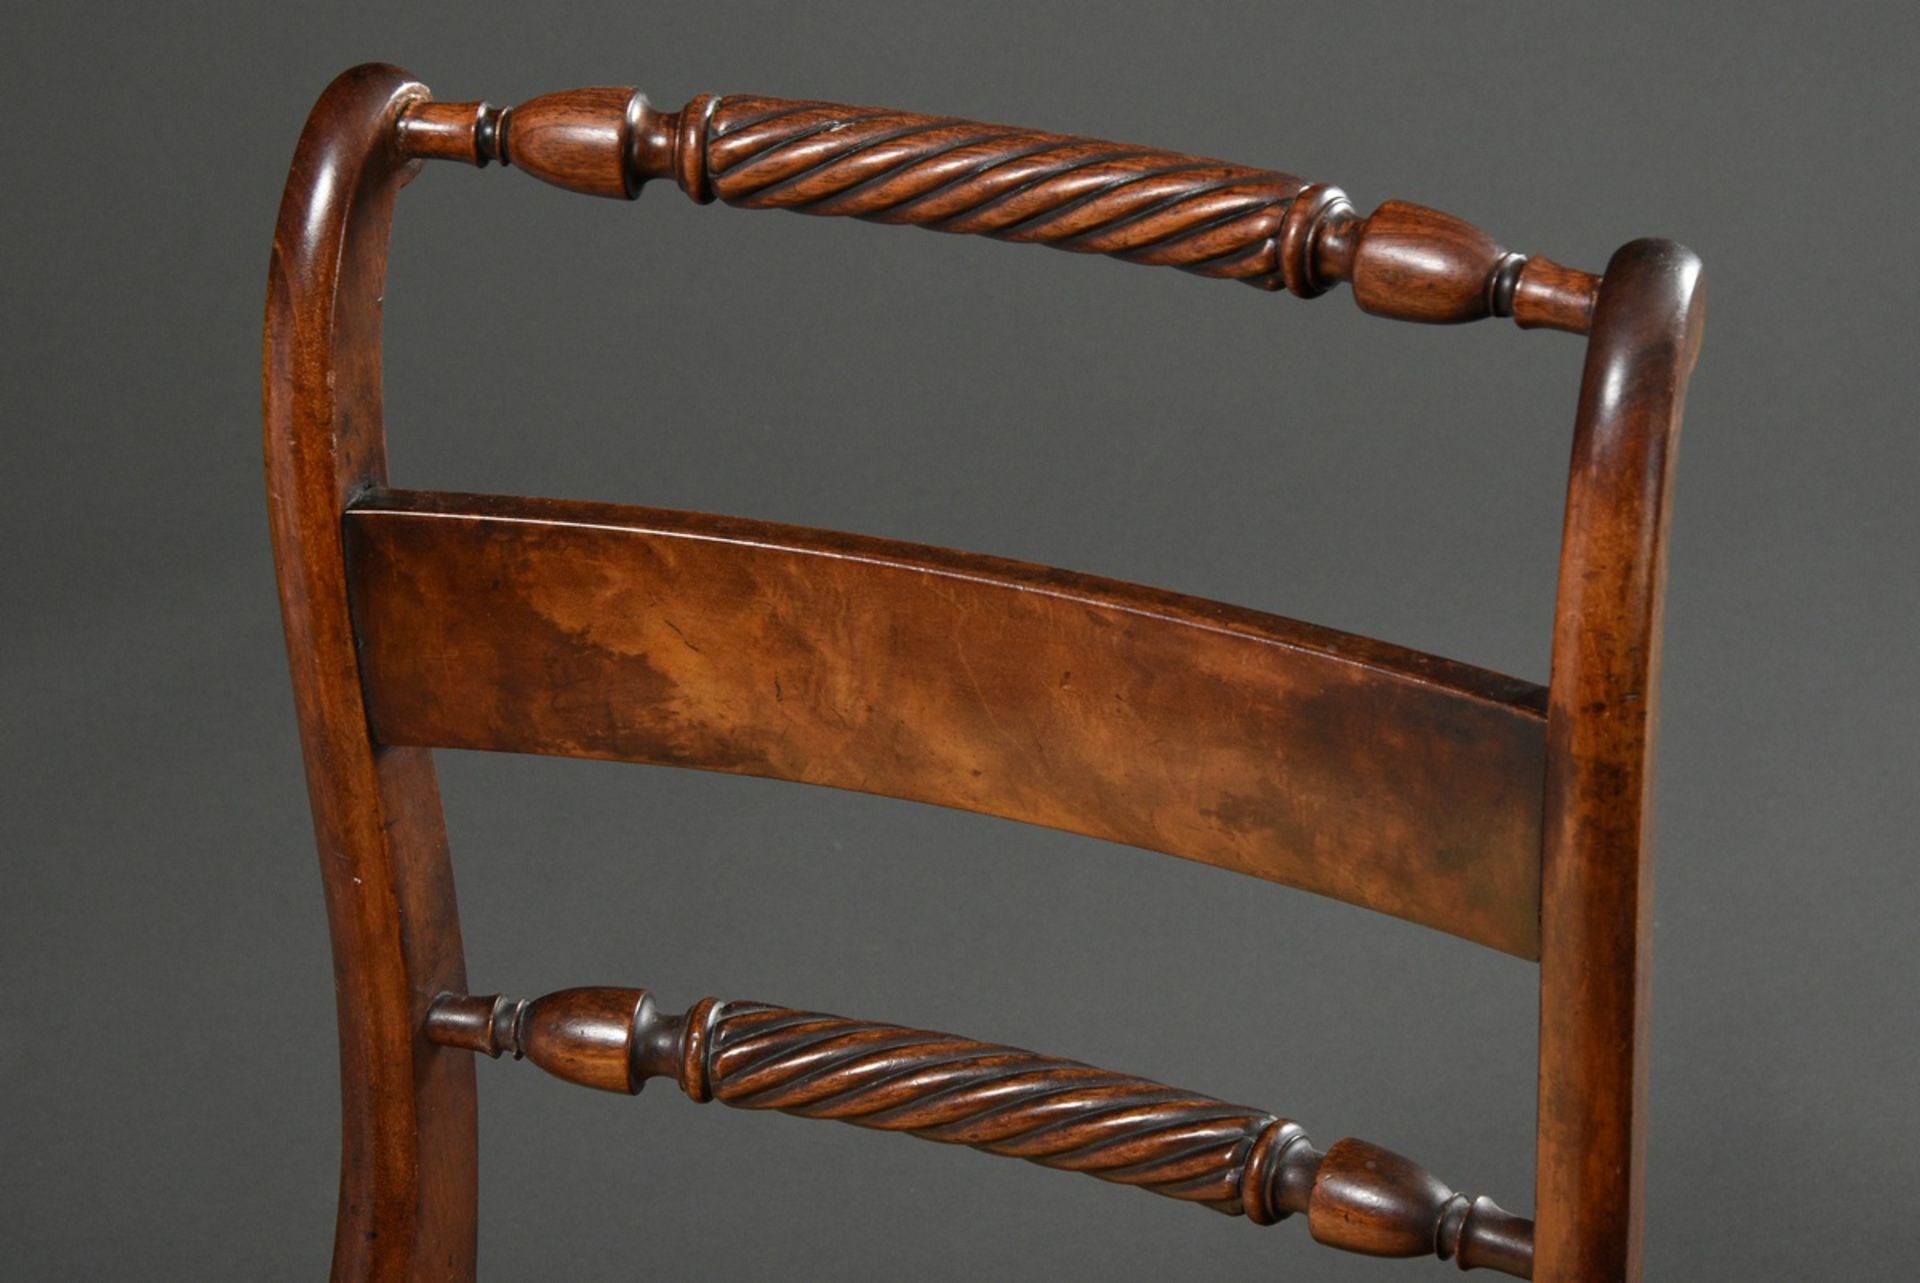 Biedermeier chair with turned rollers in the backrest, mahogany, light upholstery, h. 46/84cm - Image 4 of 4